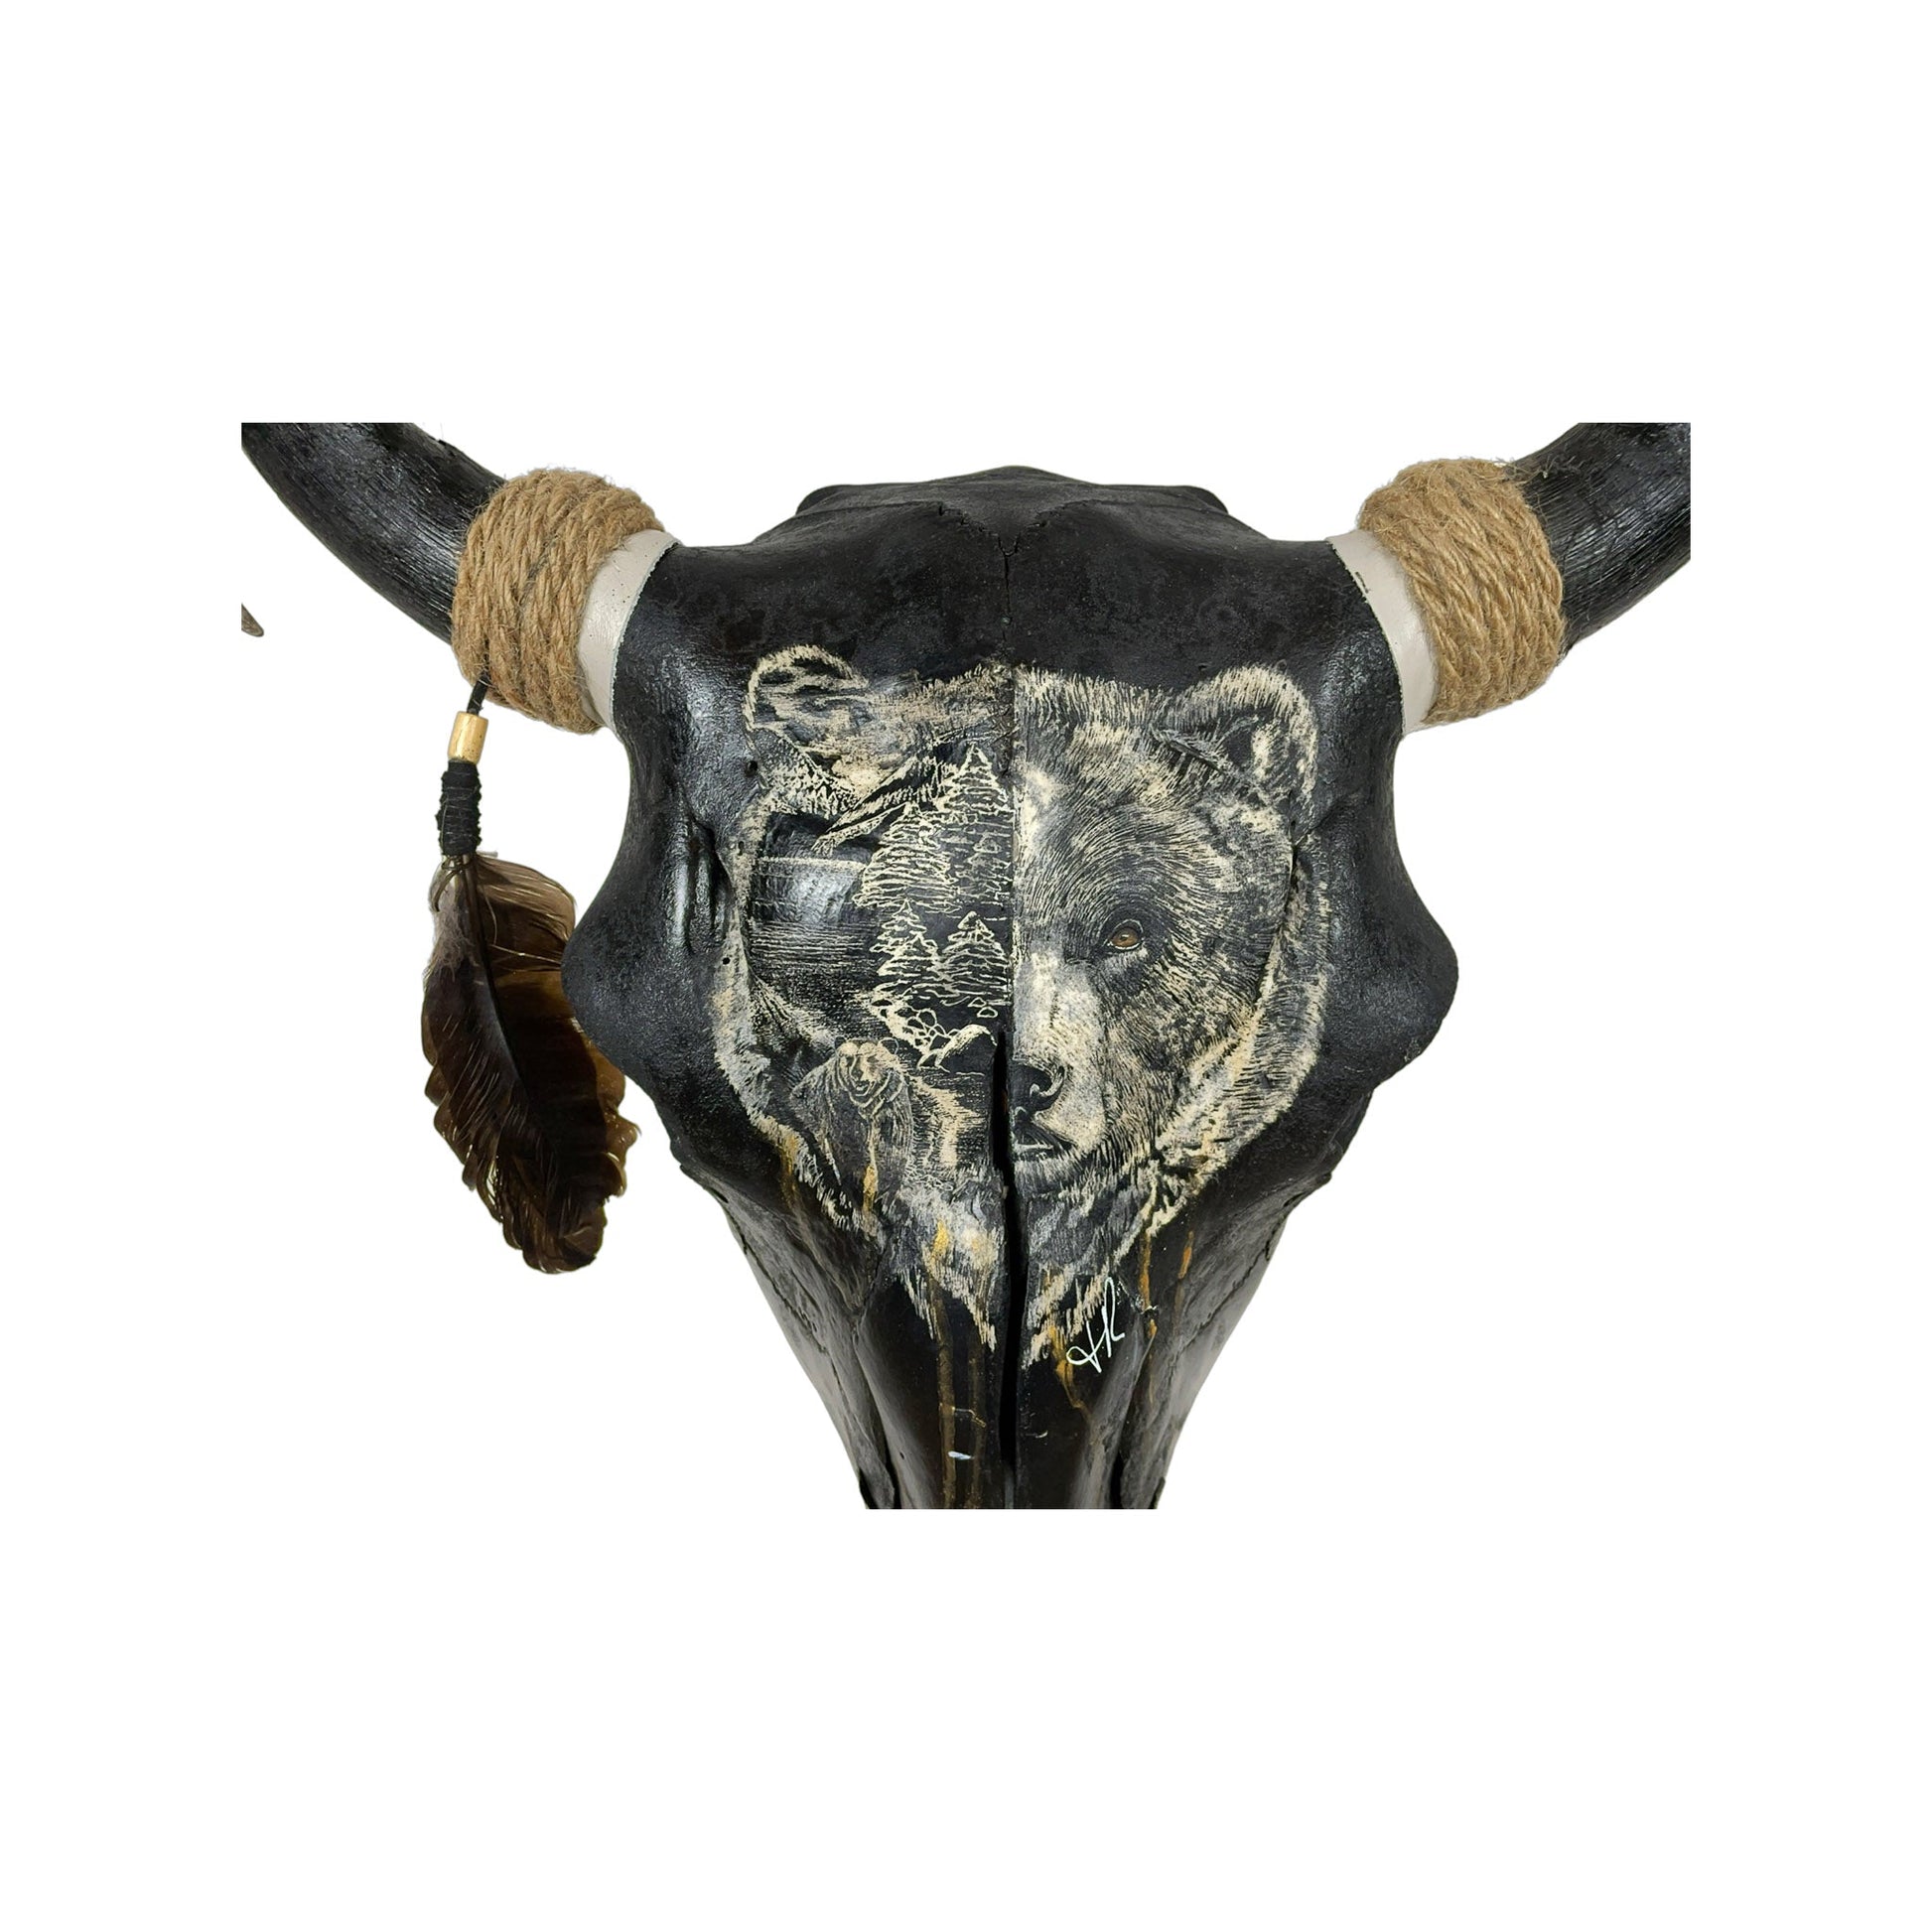 A Young Bull Engraved Skull Taxidermy Wall Decor featuring a bear head and a landscape